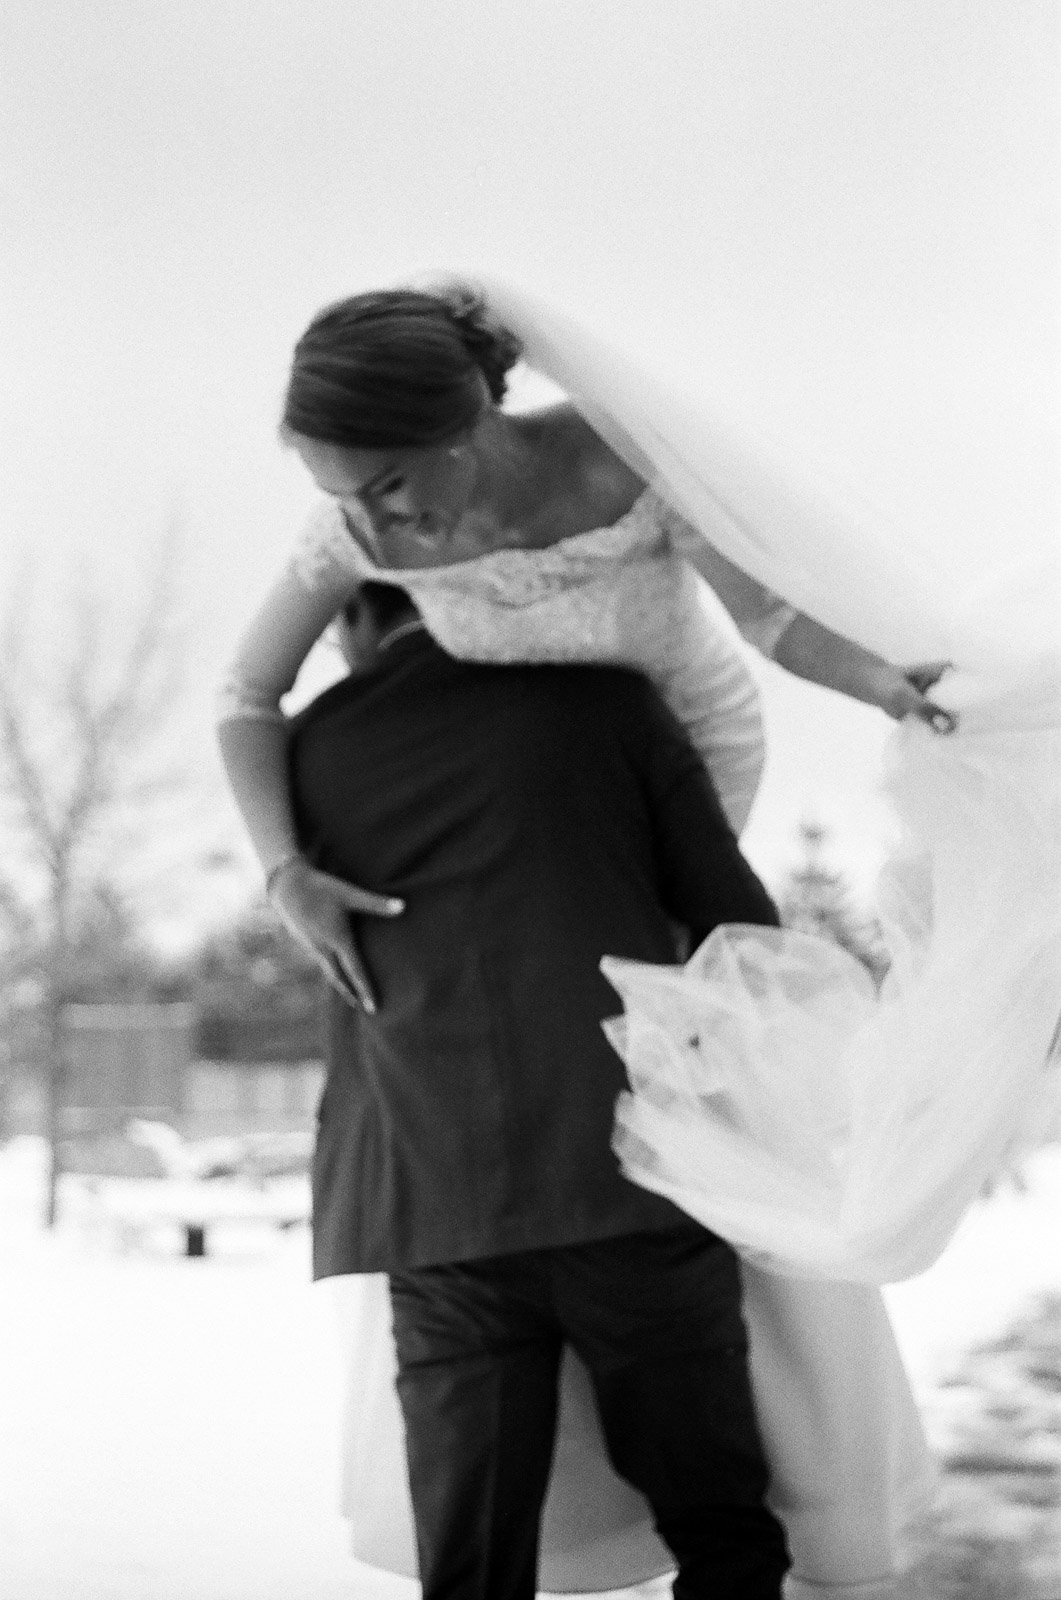 Black-and-white photograph Groom carrying his bride on their wedding day in Snowy Mountains of Albuquerque New Mexico